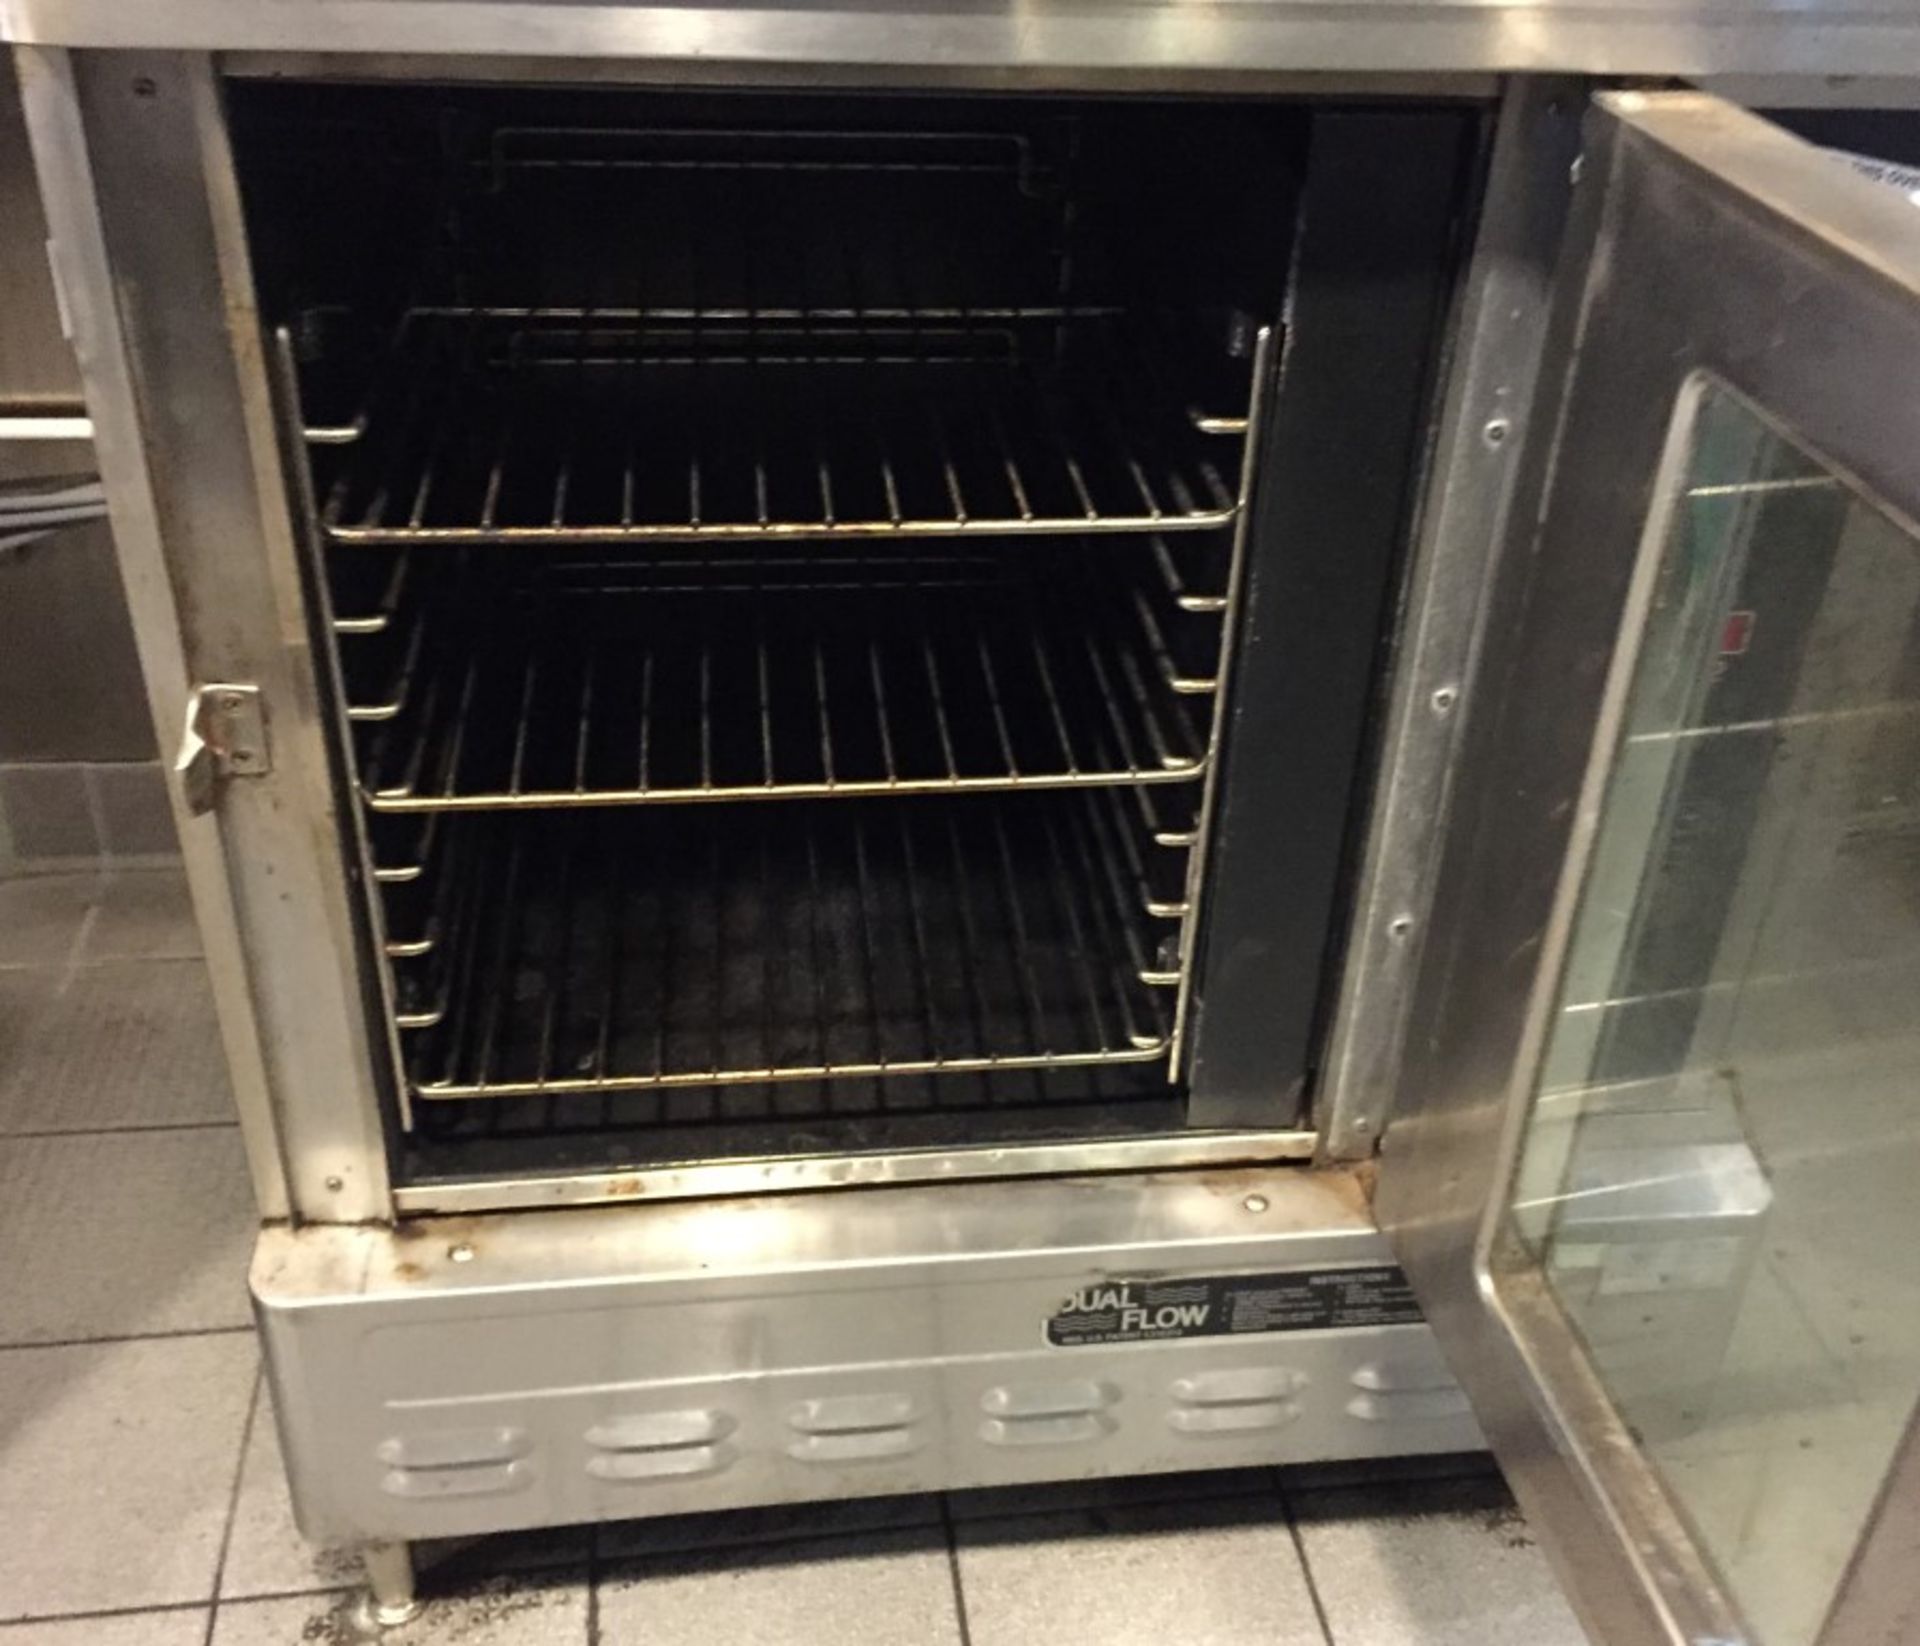 1 x Blodgett Convection Oven - Model DFG50 - Features Duel Flow, Half Size, Single Deck, Solid State - Image 3 of 7